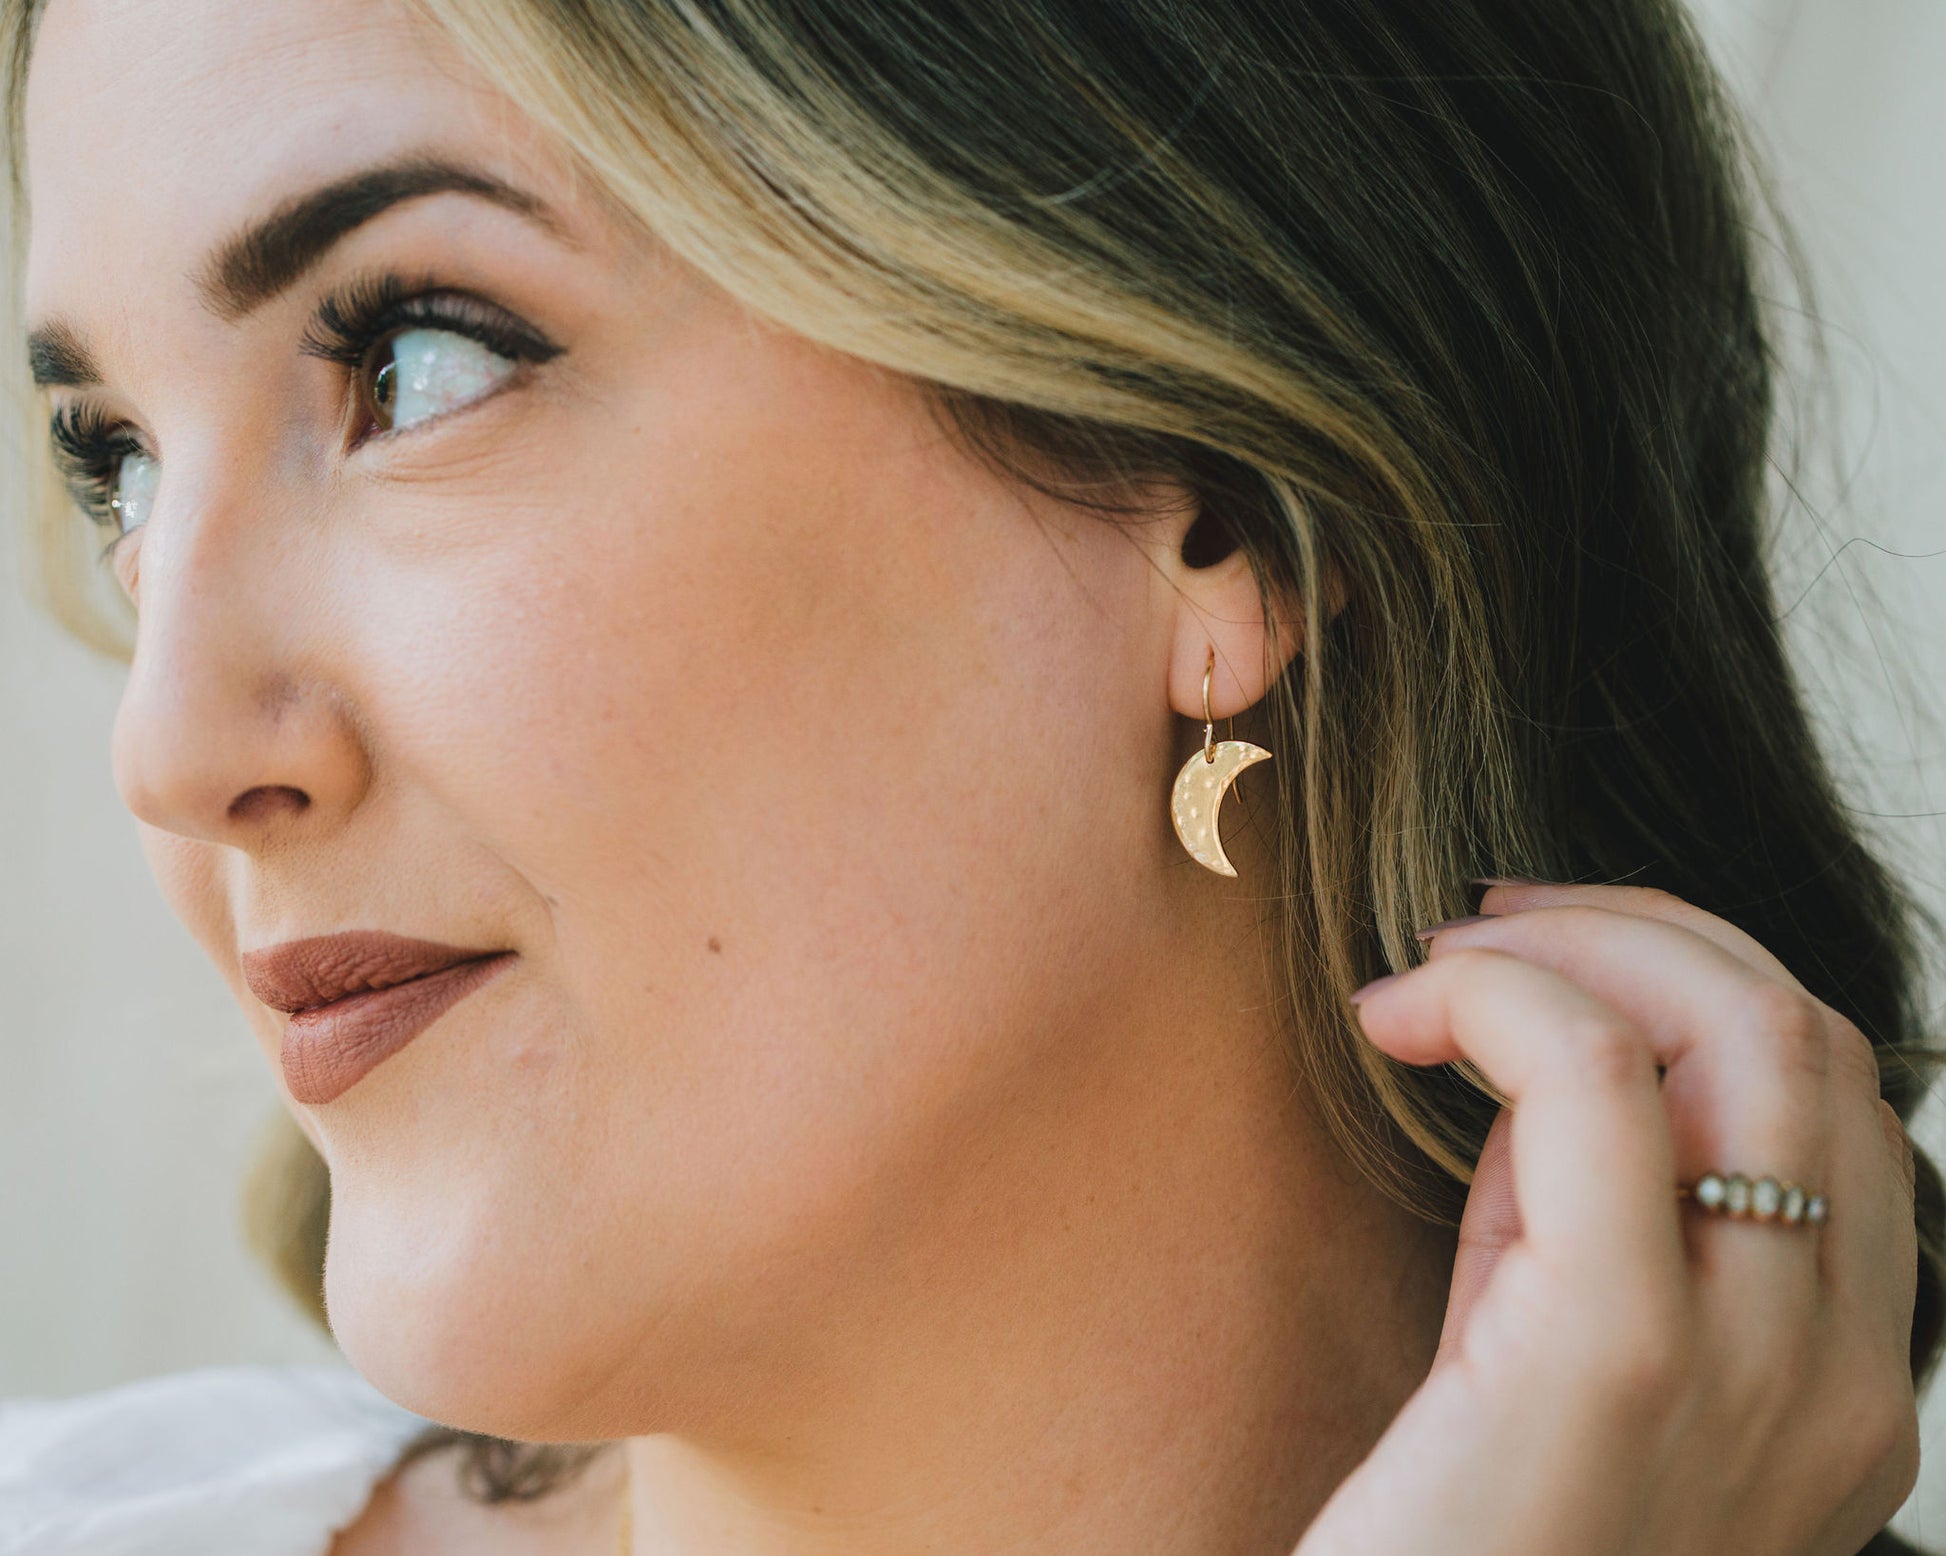 Model is wearing the 14 karat yellow gold filled version of our celestial sisterhood earrings. Handcrafted using elevated materials, choose from yellow gold or sterling silver. They are delicately hand hammered to mimic the surface of the moon.